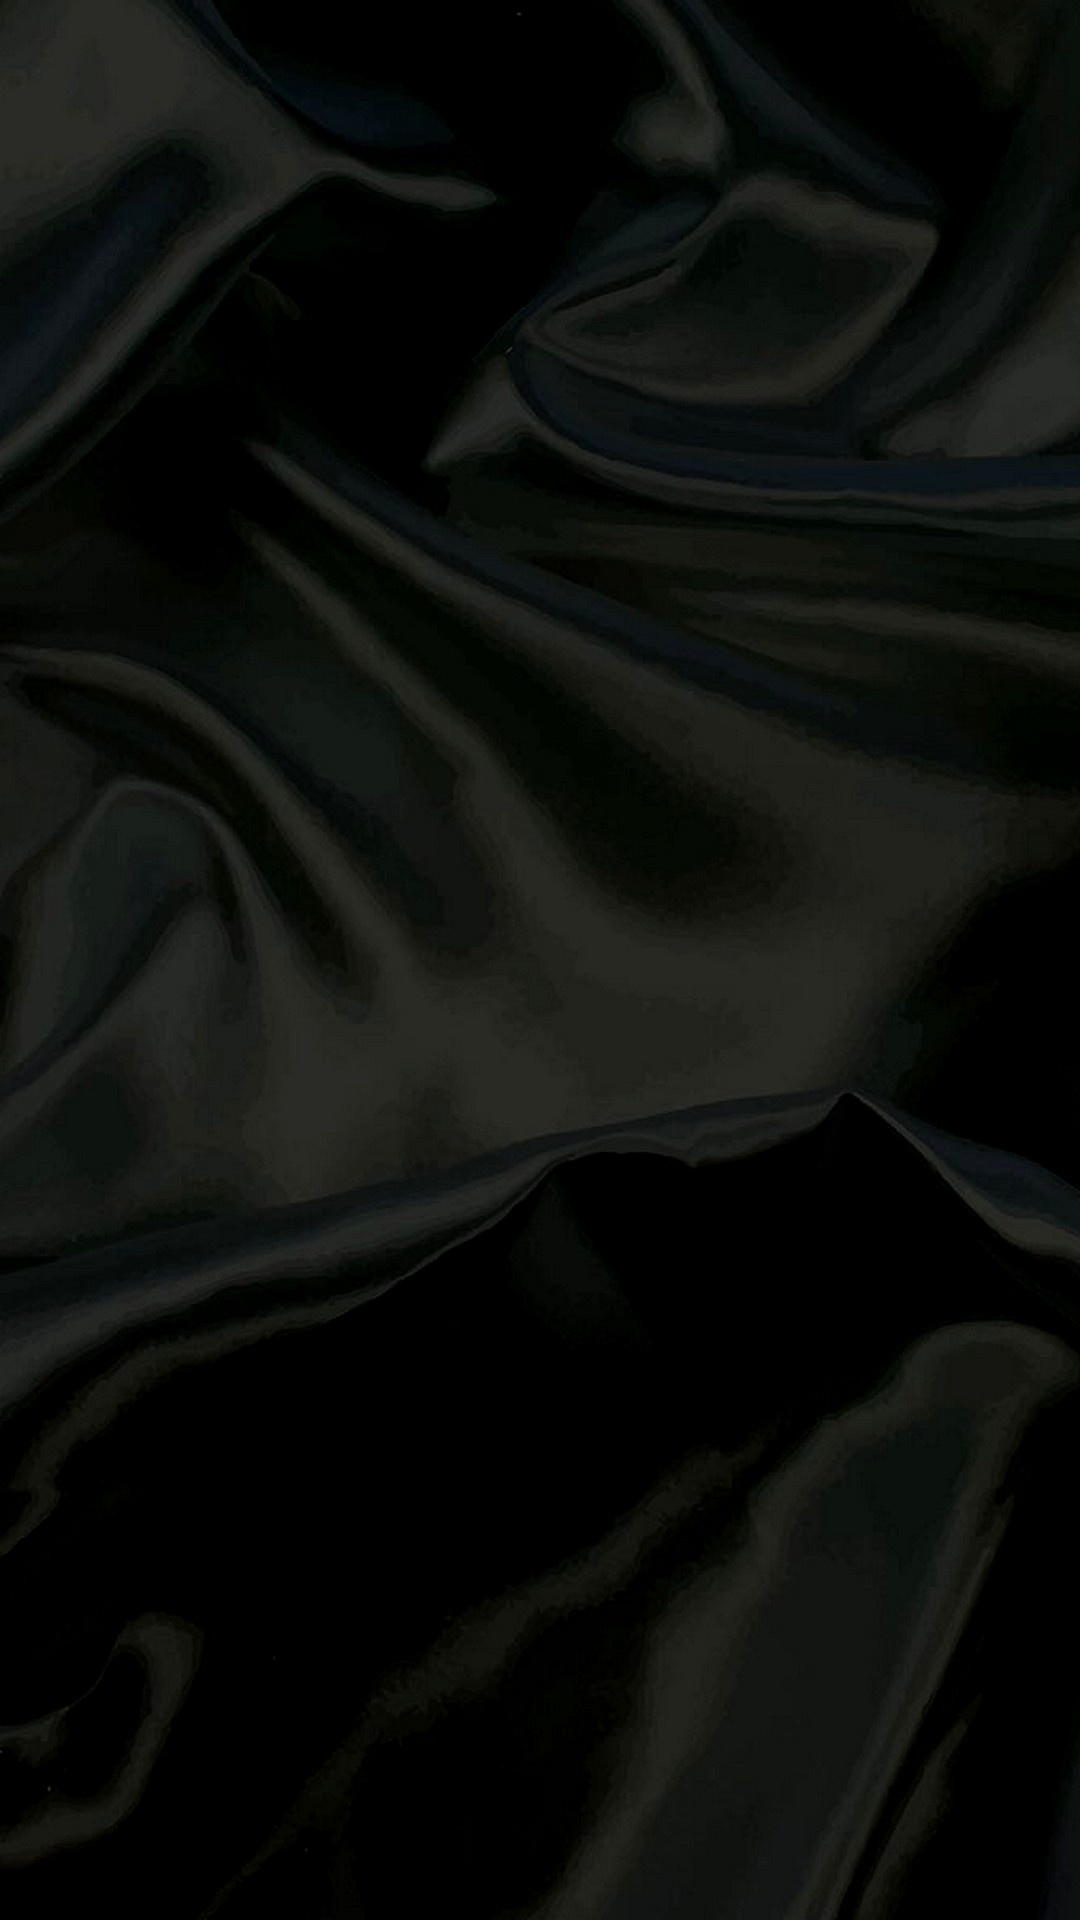 Android wallpaper, Black silk, 2022 android wallpapers, Dark, 1080x1920 Full HD Handy